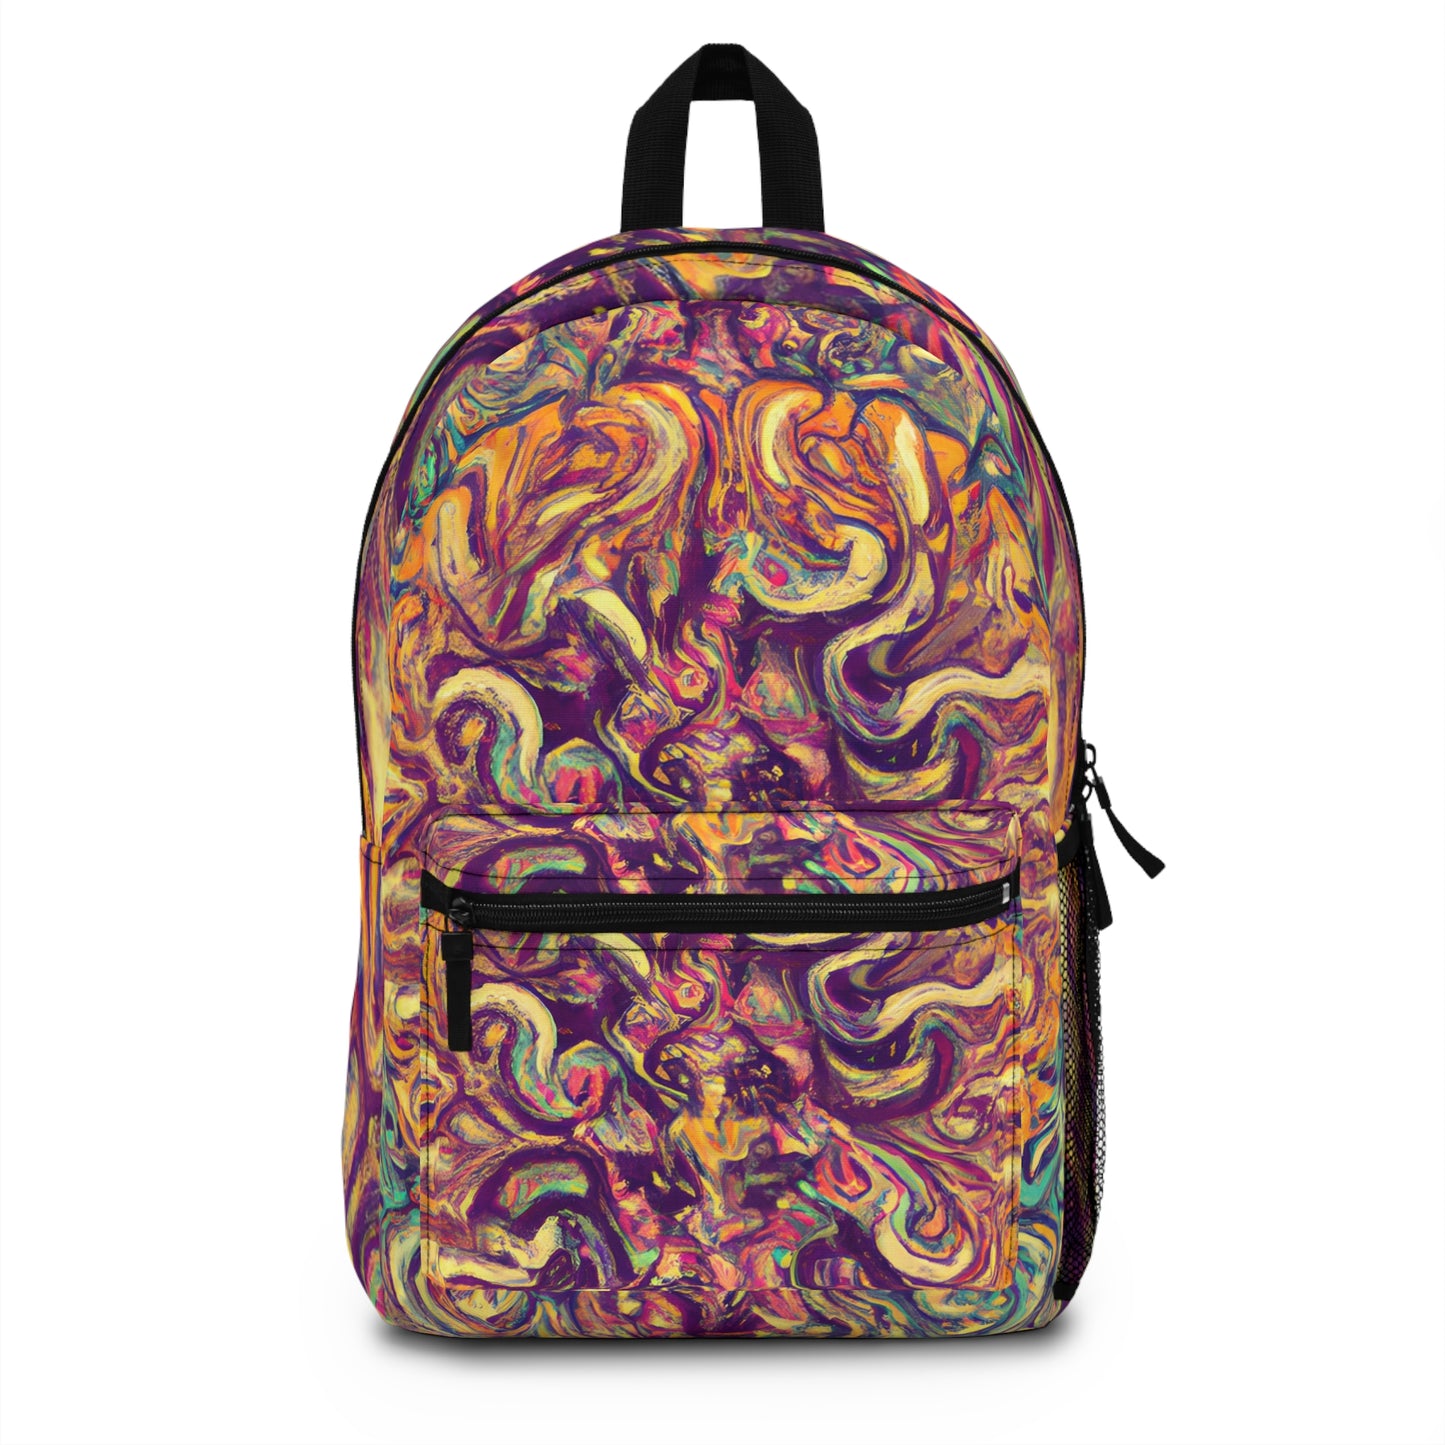 LuckyDazzle - LGBTQ+ Pride Backpack